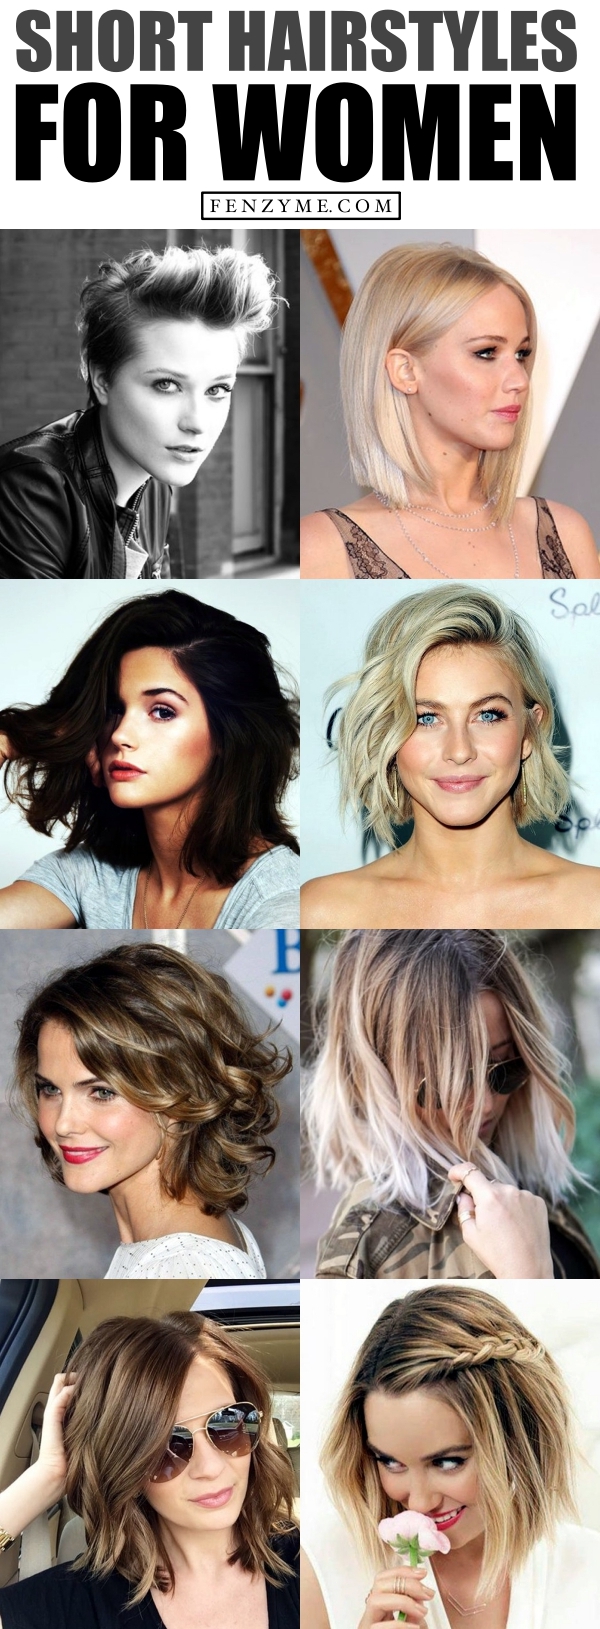 Short Hairstyles for women